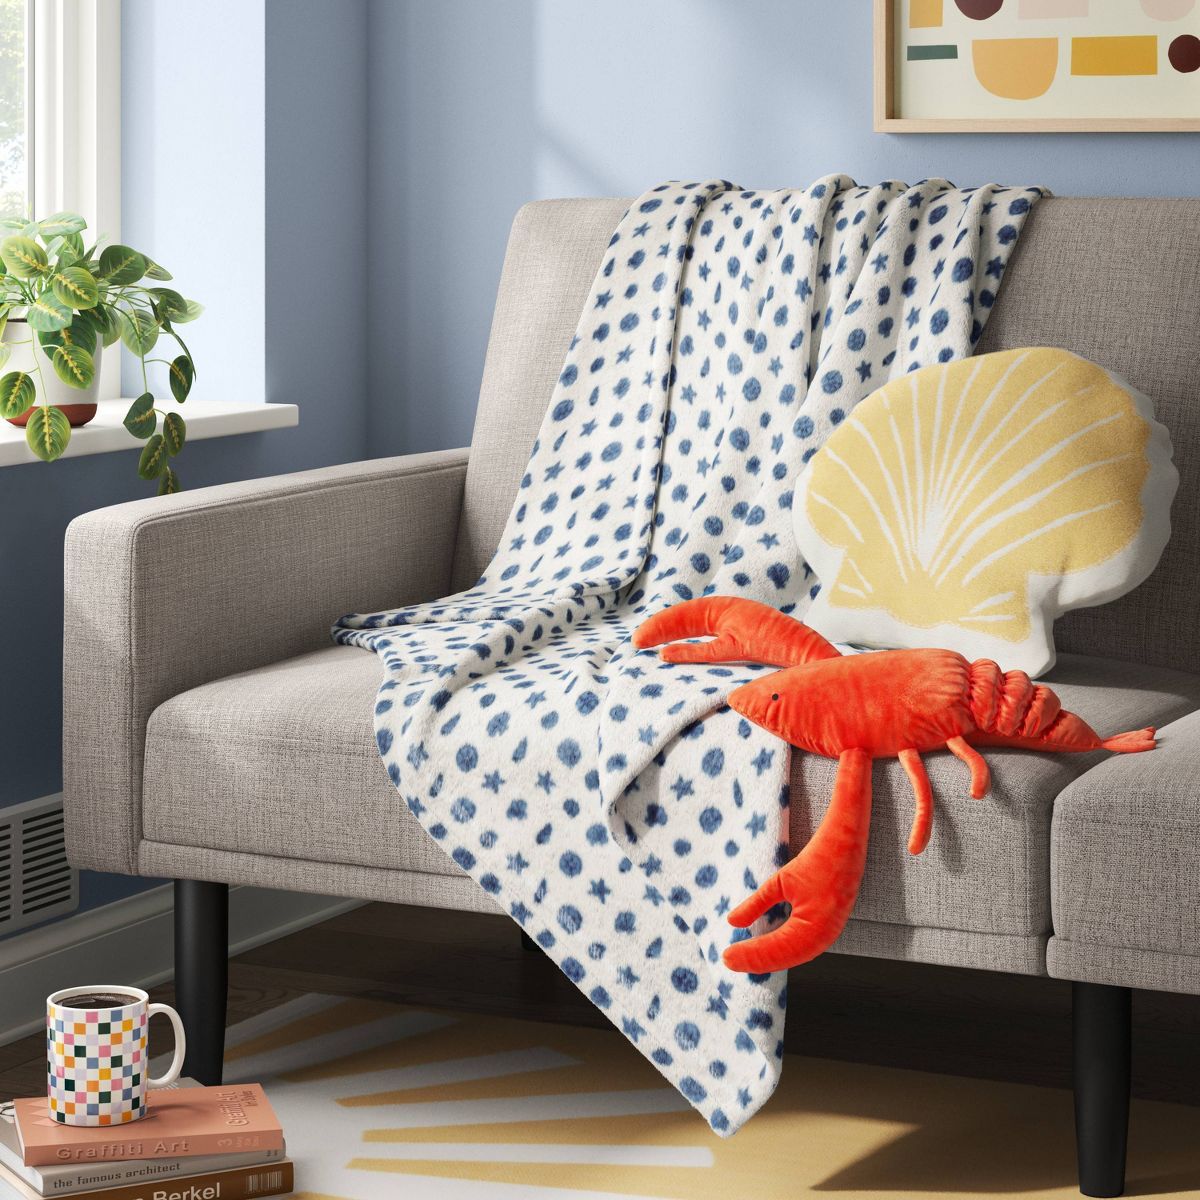 Seashell Shaped Throw Pillow Yellow - Room Essentials™ | Target